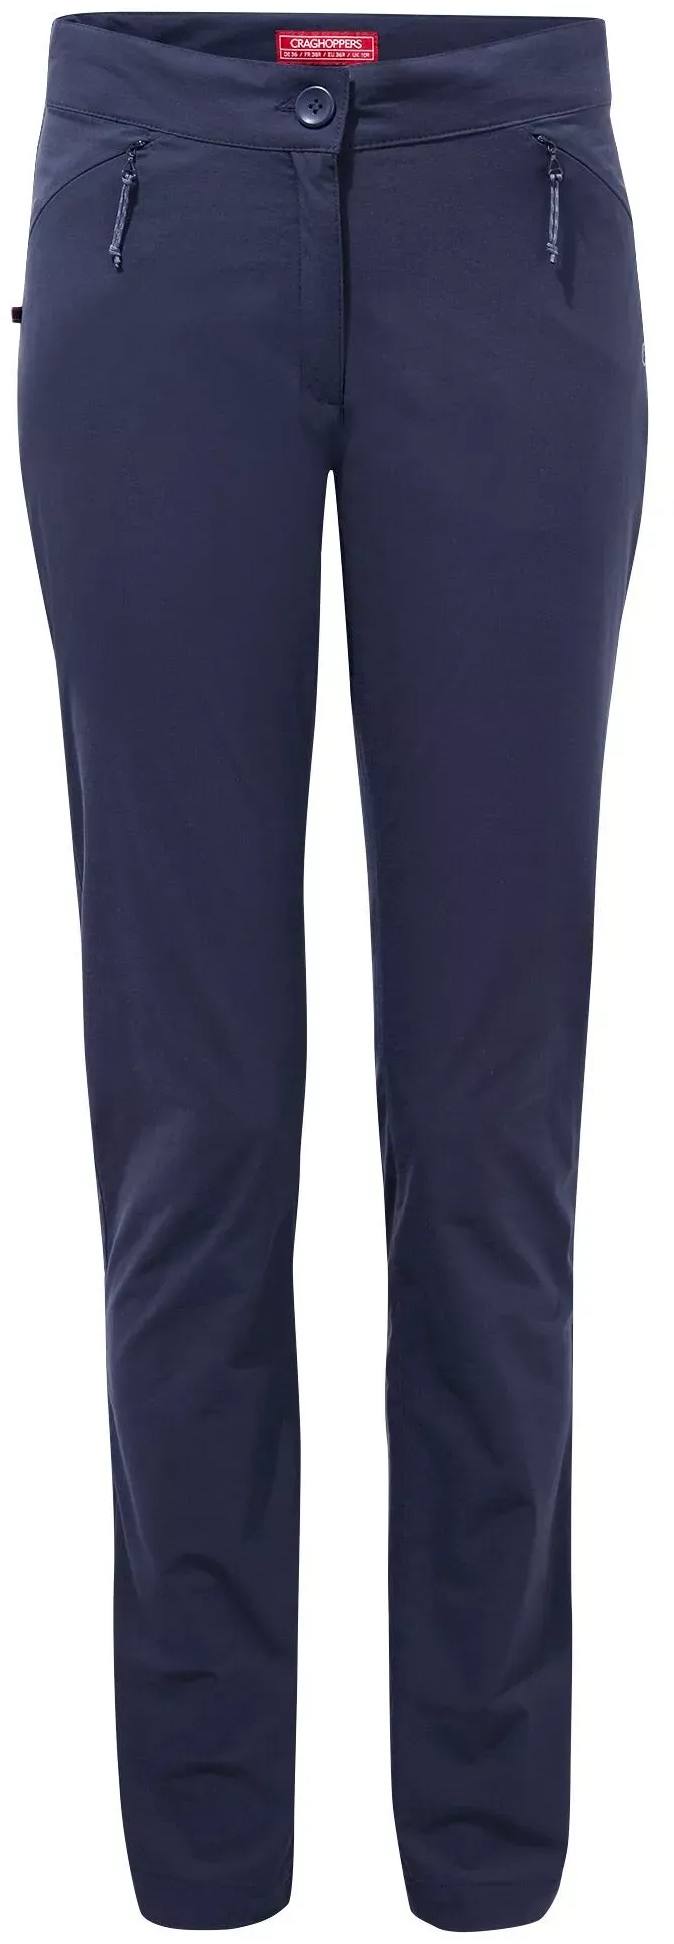 Women’s Nosilife Pro Active Trousers Navy 14